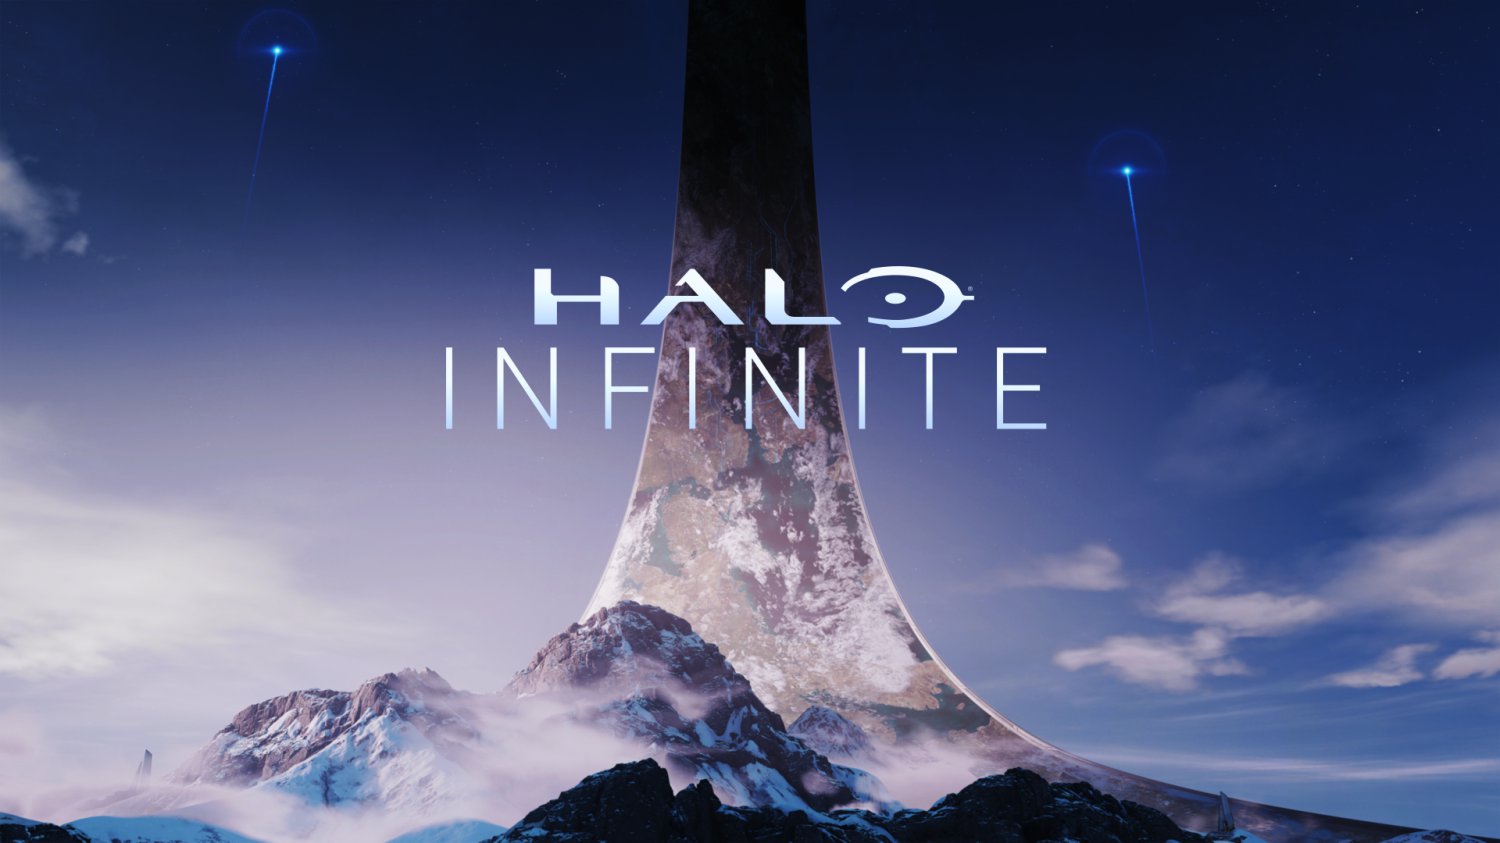 Halo Infinite Game  13"x19" (32cm/49cm) Polyester Fabric Poster